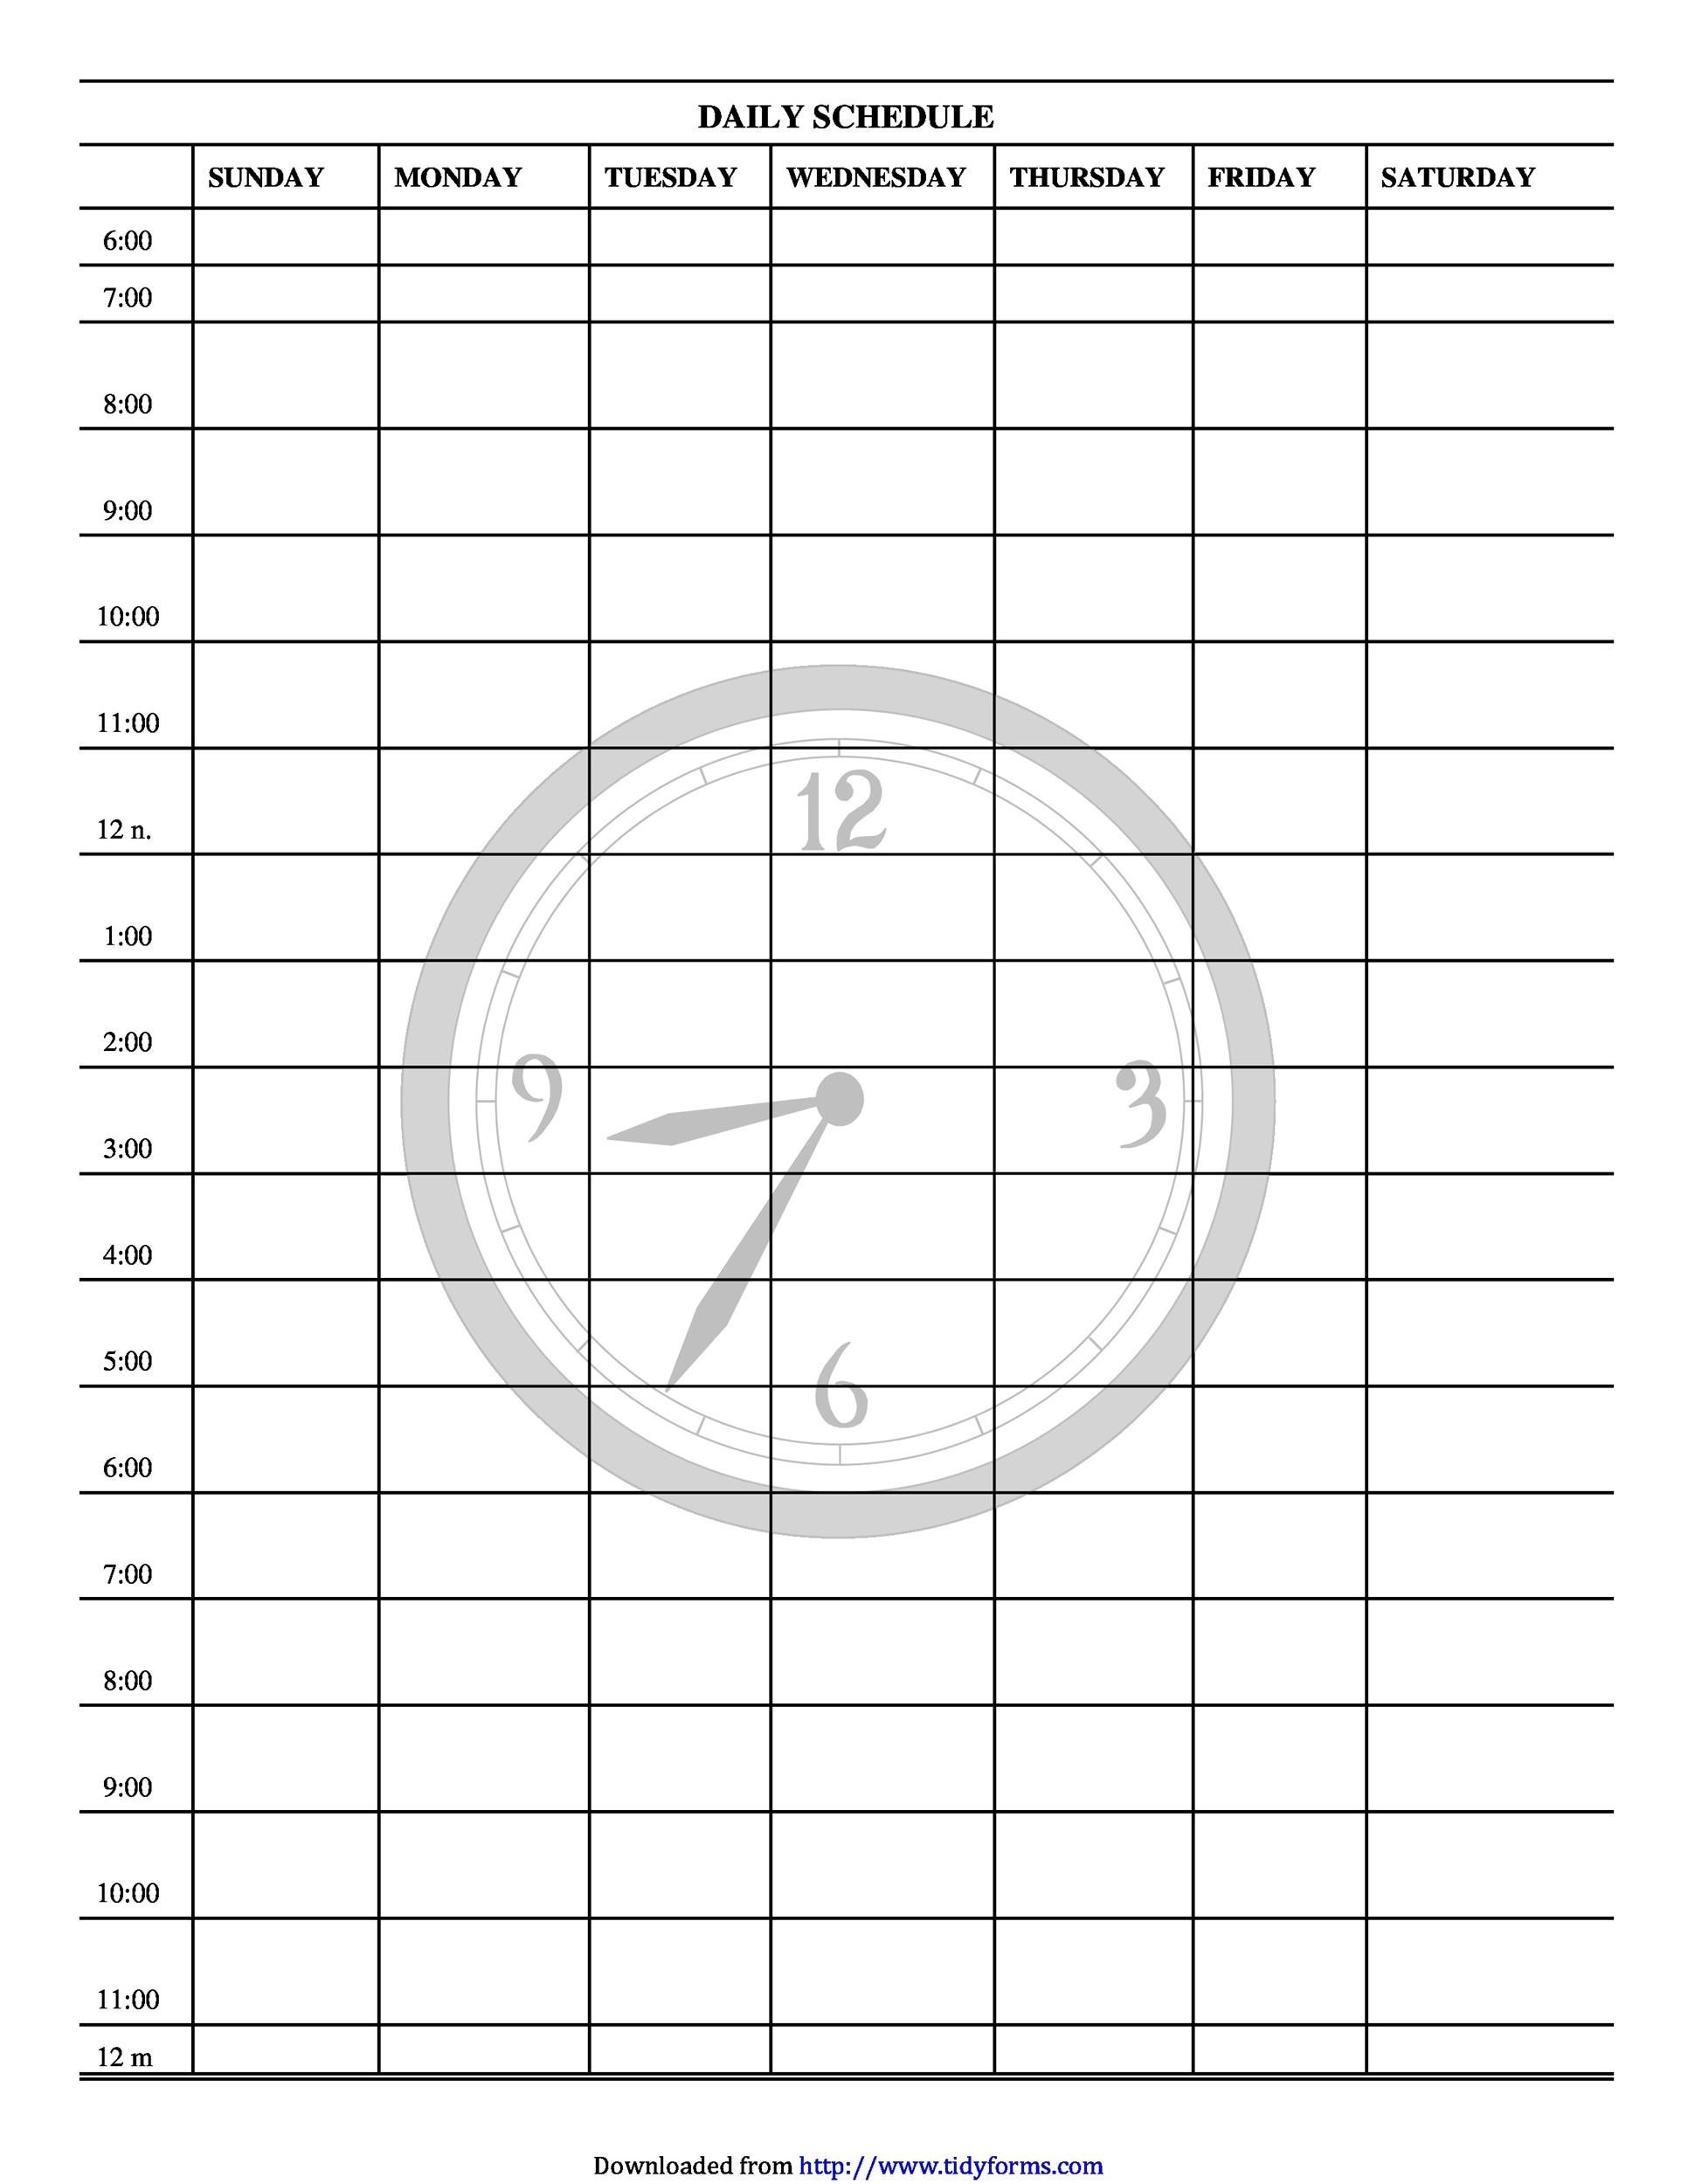 Time Management Chart For Housewives